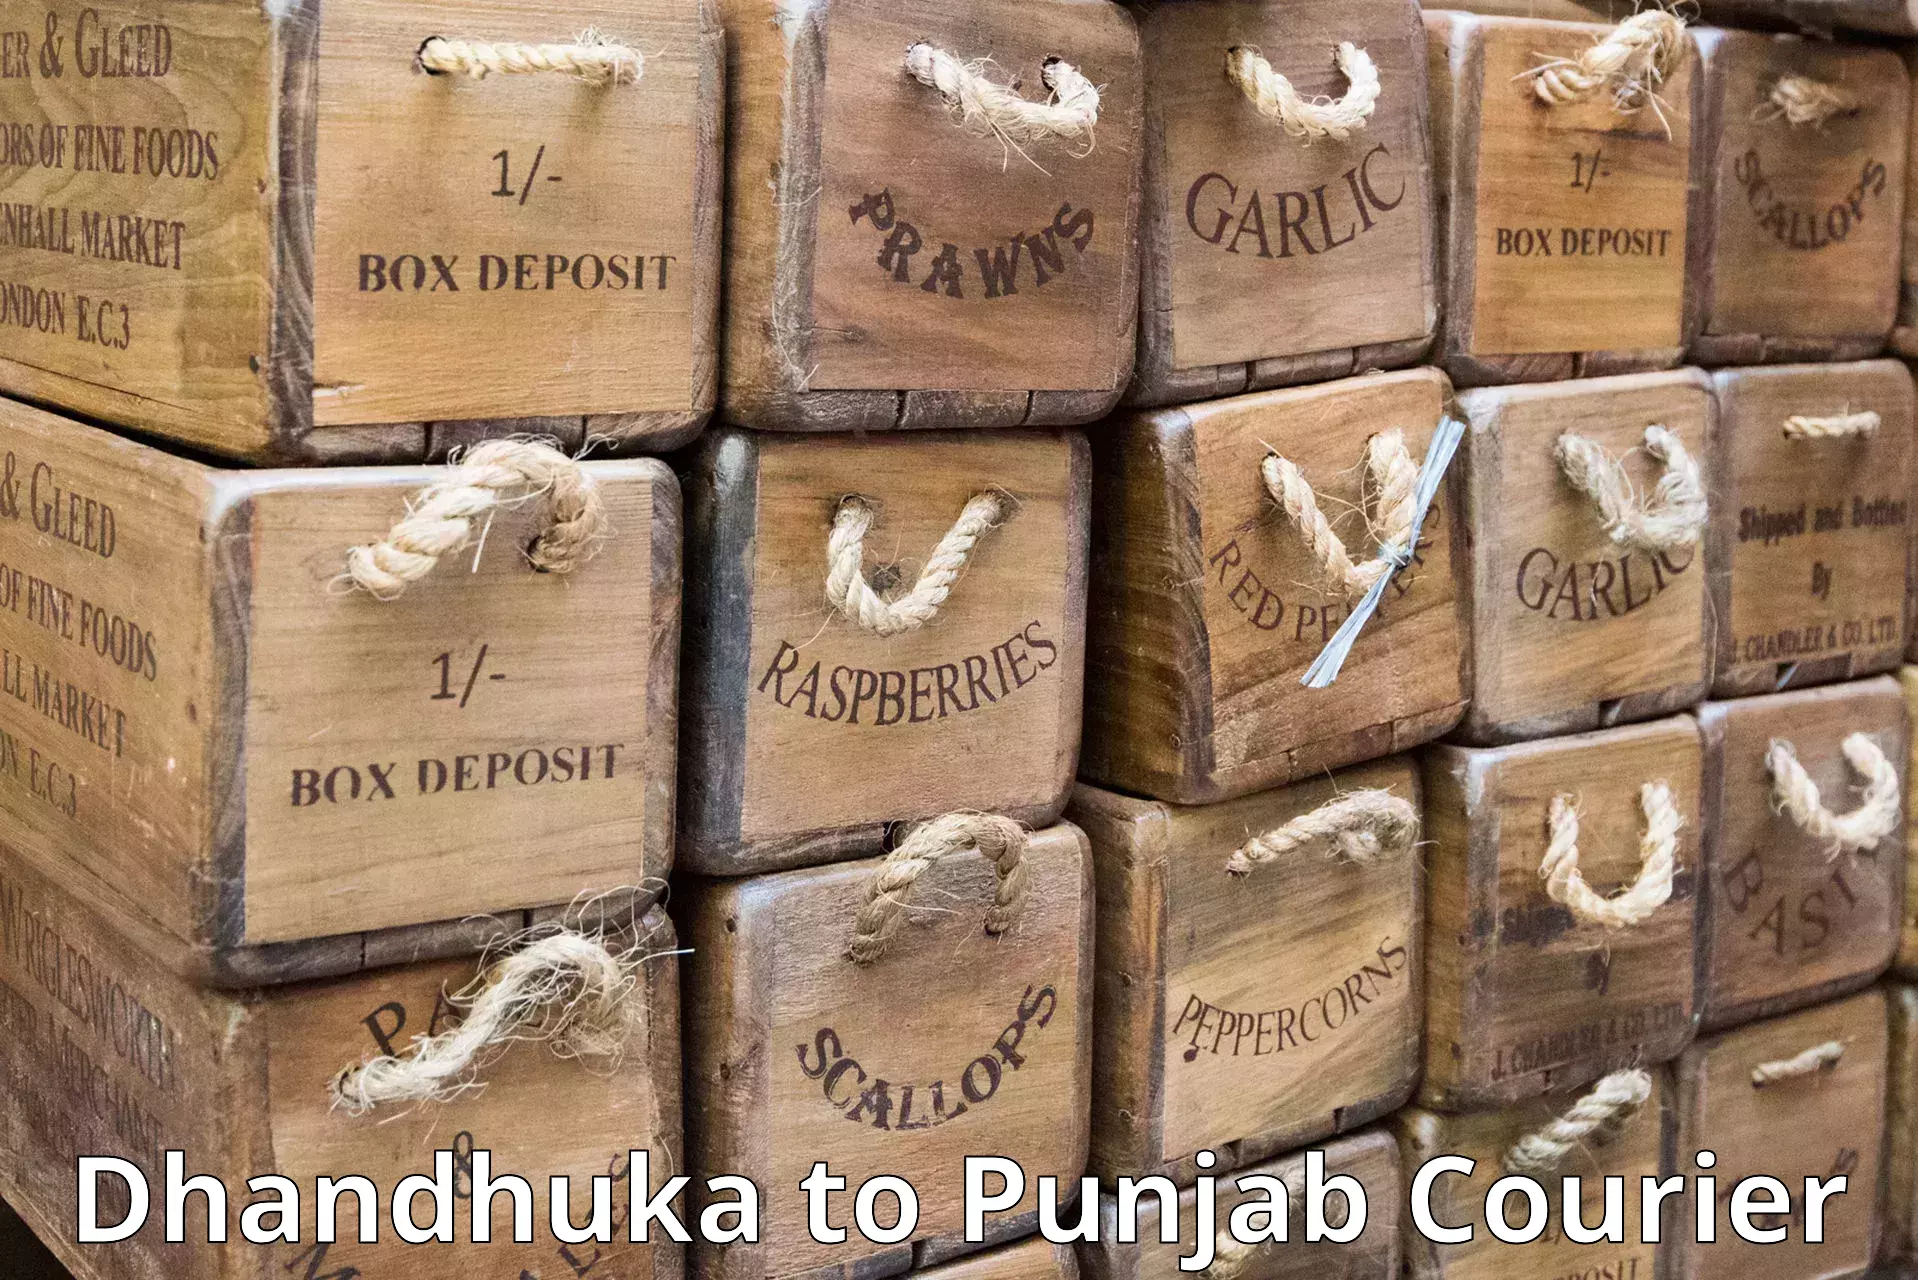 State-of-the-art courier technology Dhandhuka to Jalandhar